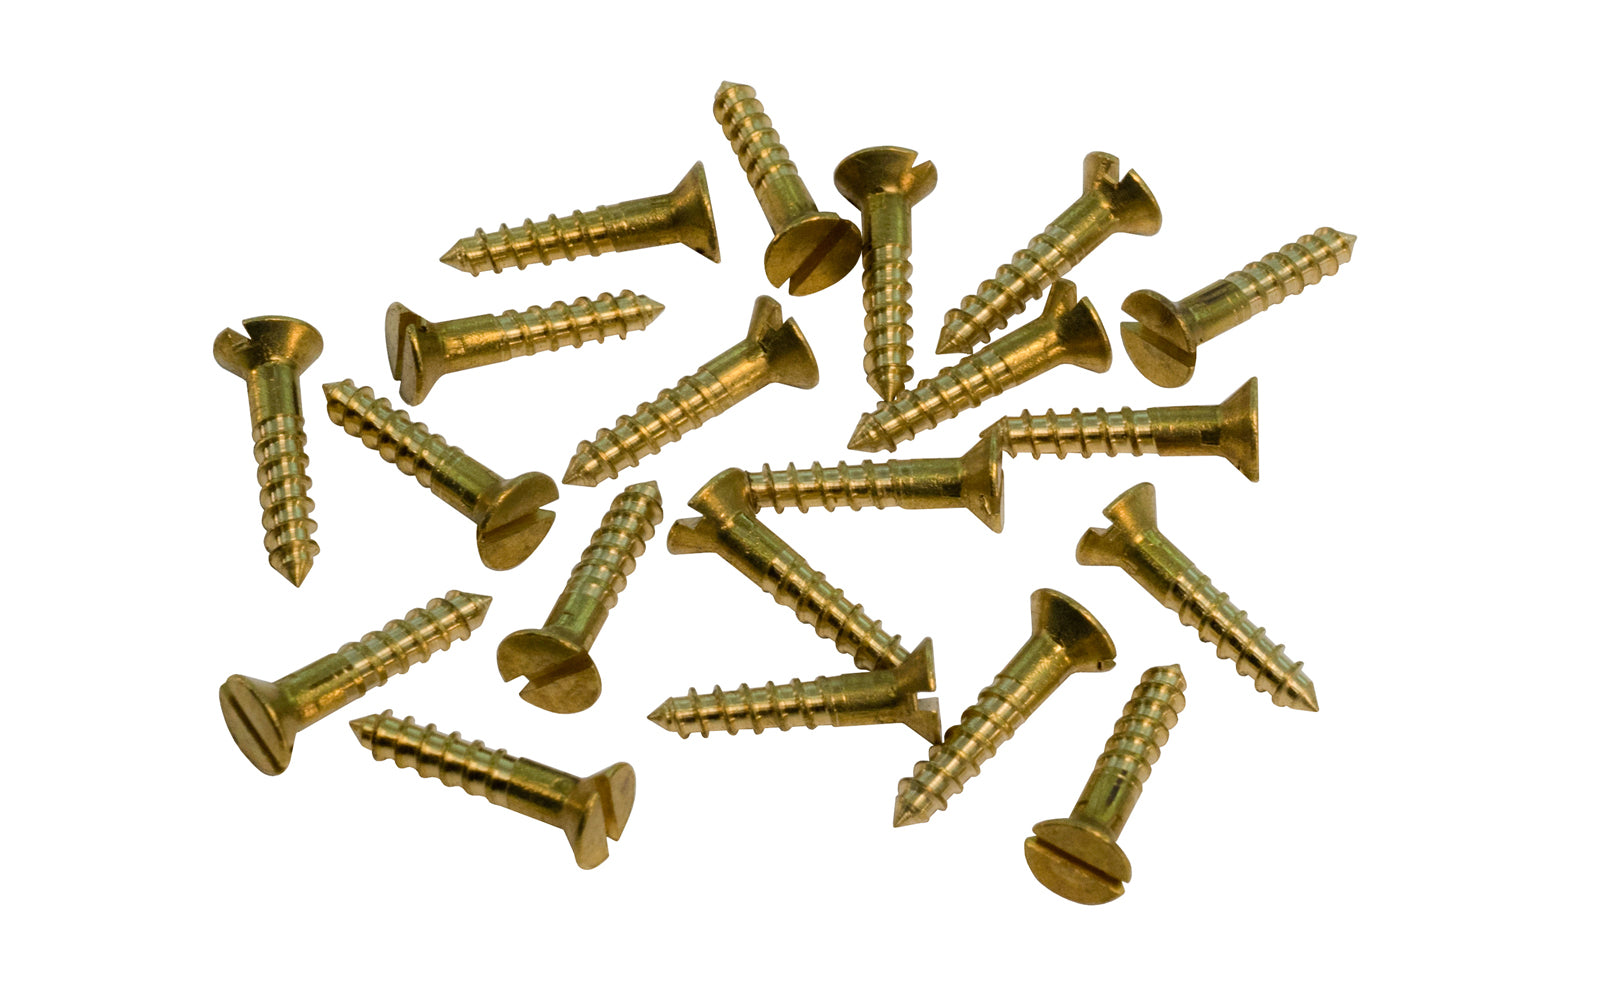 Solid Brass #5 x 5/8" Flat Head Slotted Wood Screws. Traditional & classic vintage-style countersunk wood screws. Sold as 20 pieces in a bag. Slotted-Head. Unlacquered brass Non-Lacquered Brass (will patina over time)